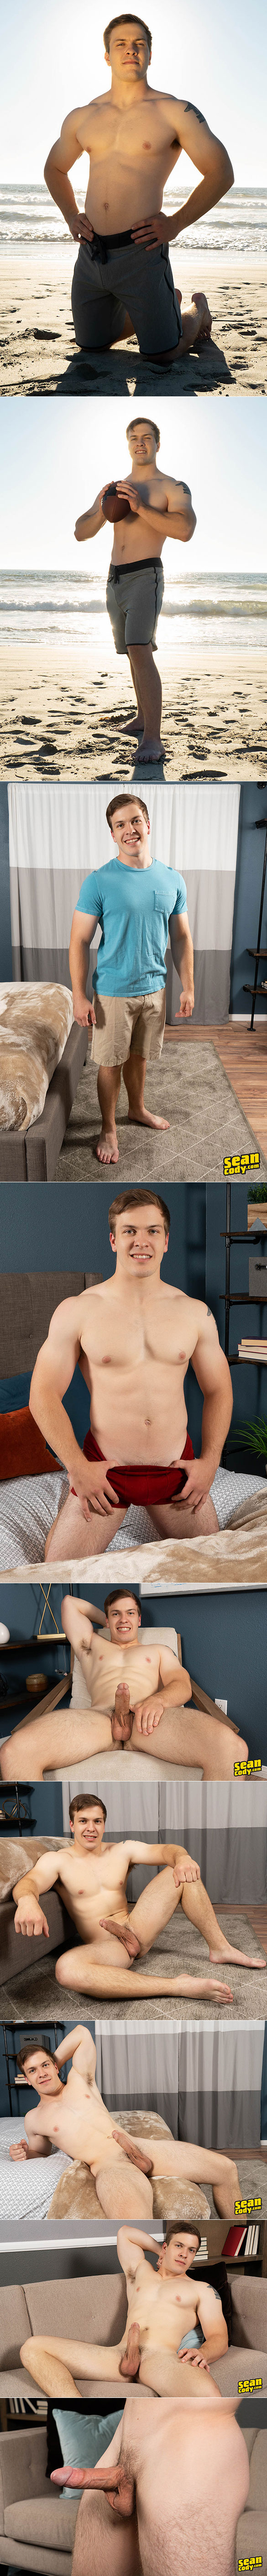 Sean Cody: Clyde busts a nut